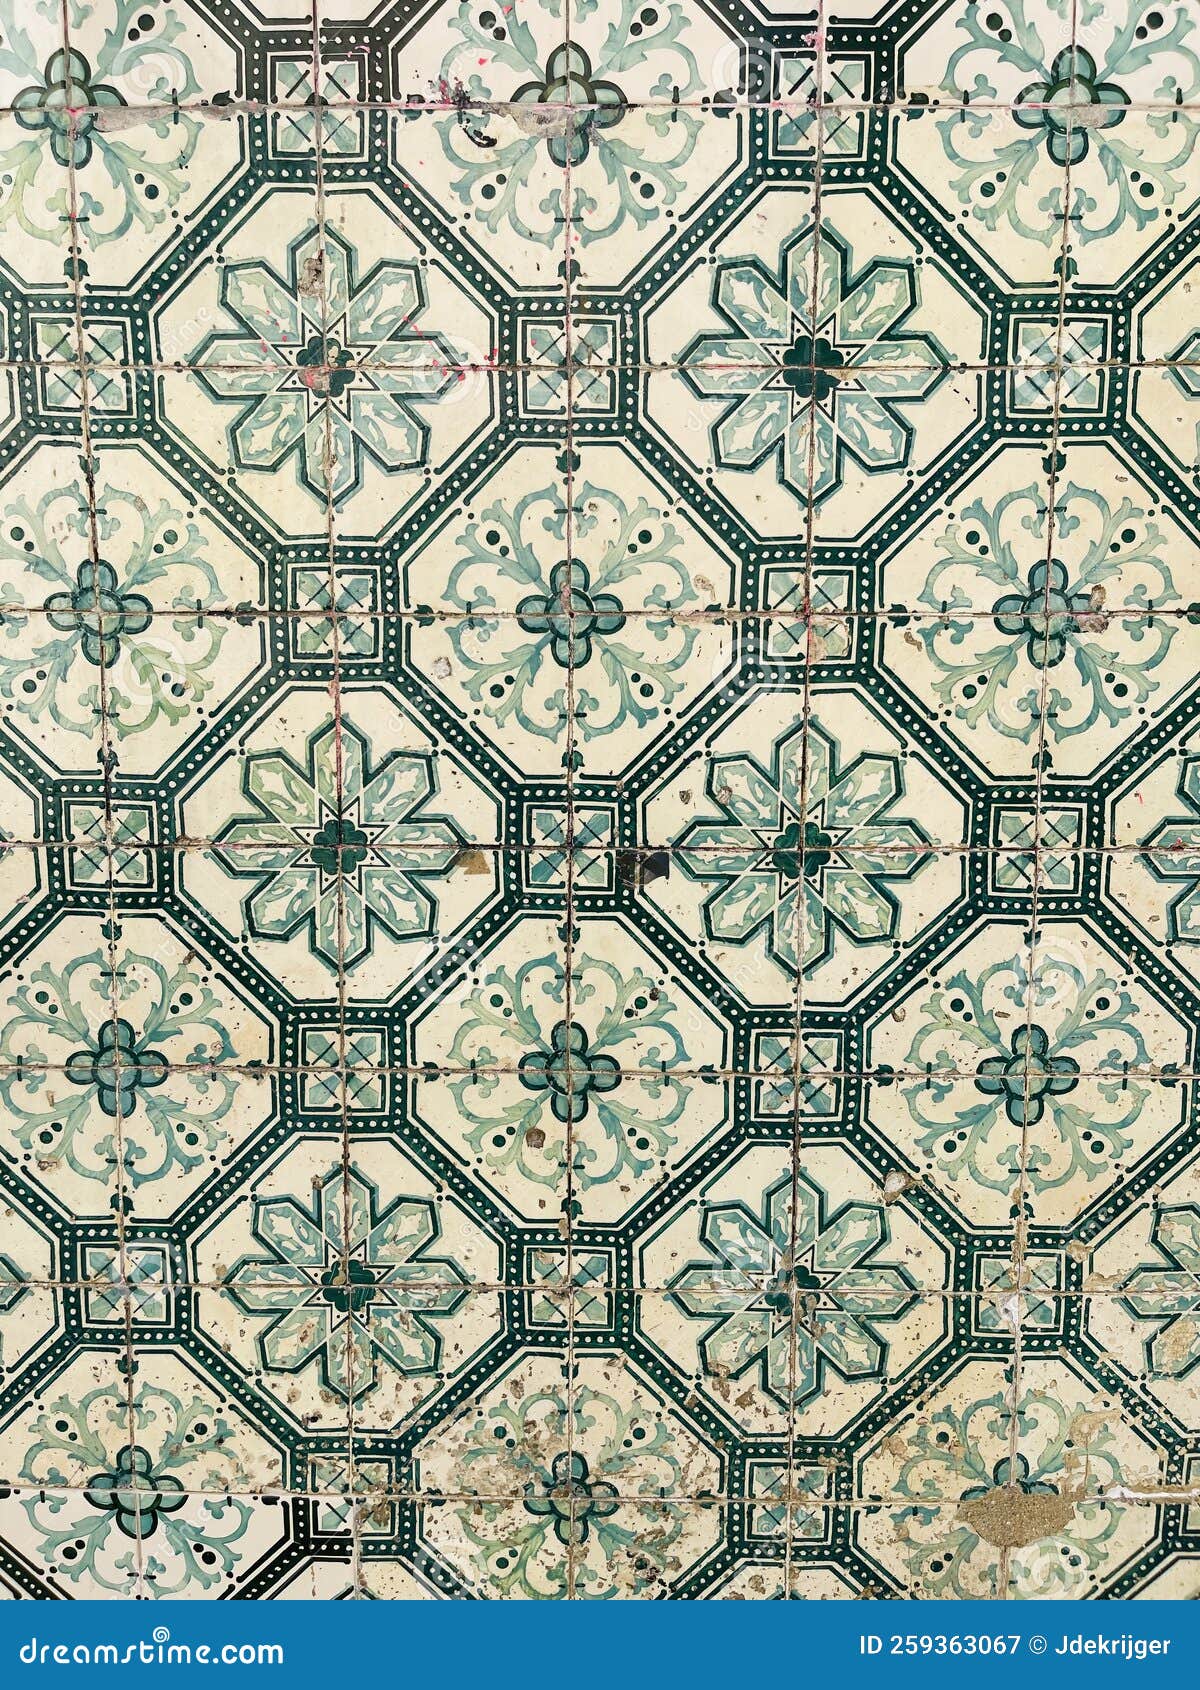 portugese tiles found on a building in lissabon